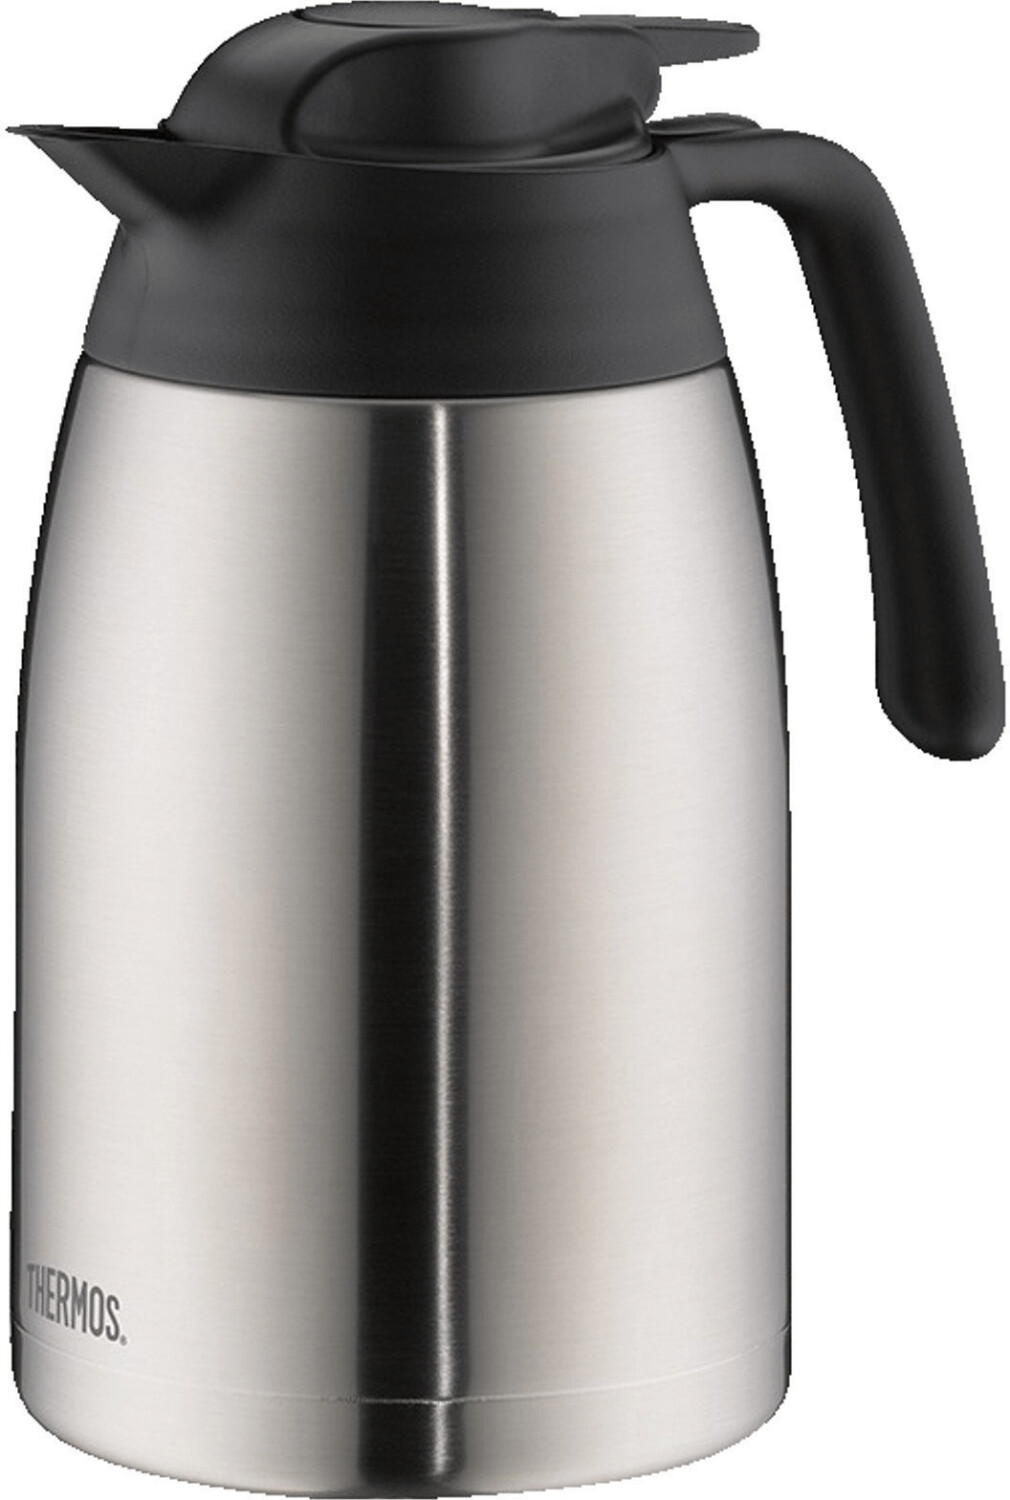 Thermos Isolierkanne THV Edelstahl 1,5 l ab 43,12